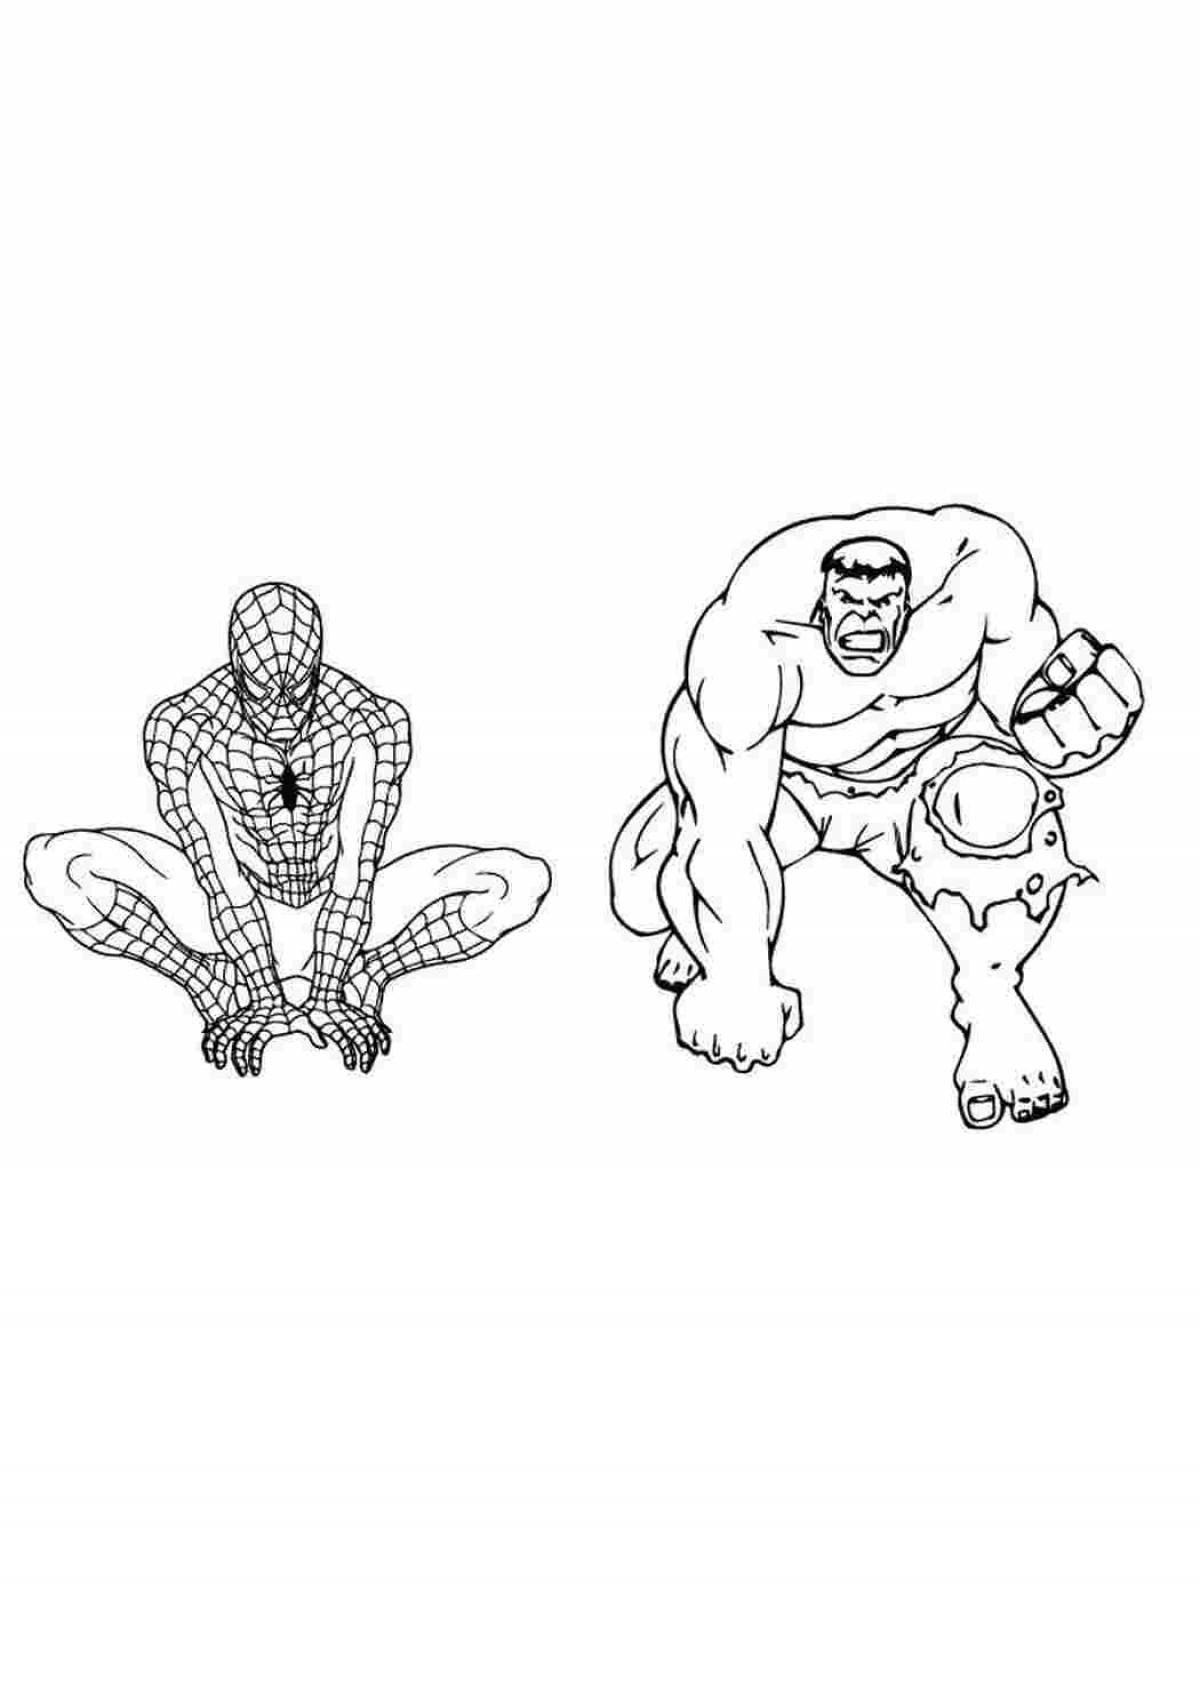 Hulk and Spiderman for kids #21